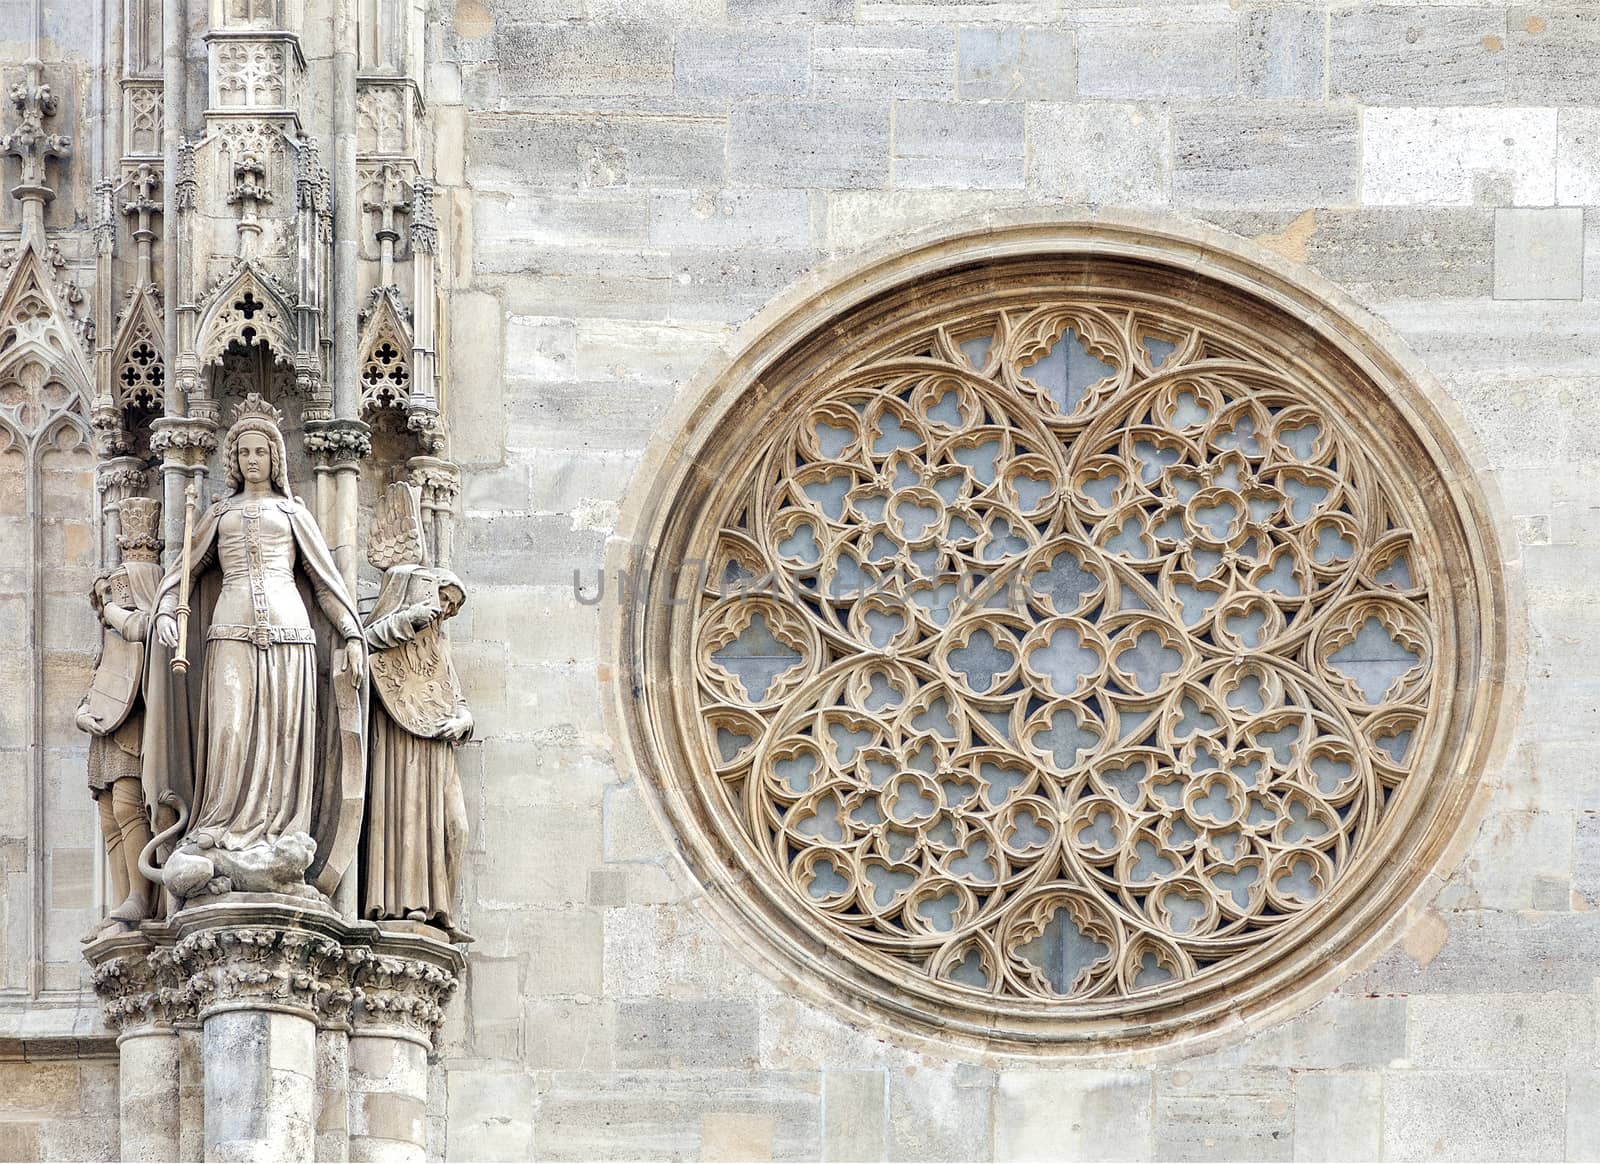 Round gothic window on the facade of the St. Stephen's cathedral, Vienna, Austria